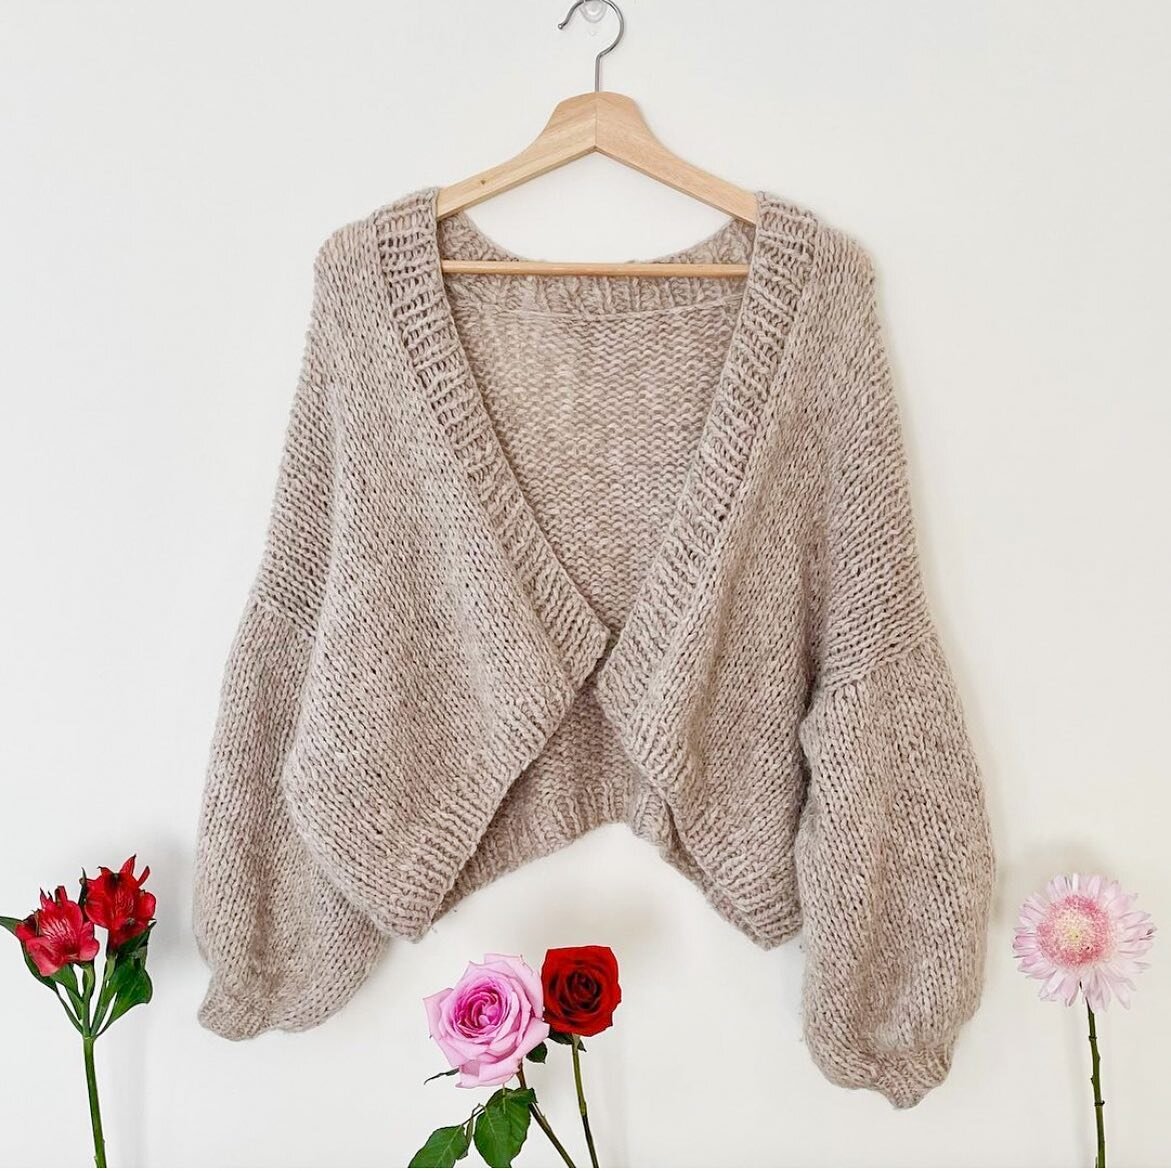 Promptly casts on another #TopGunBomber in beige Chainette from @lionbrandyarn 😍 

Find this pattern in my Ravelry + Etsy shops! 
.
📸 @myyarnjourney 
Pattern: #TopGunBomber (sizes S-3X)
.
.
.
.
.
.
.
.

#knitting #knittersofinstagram  #yarn #knitst